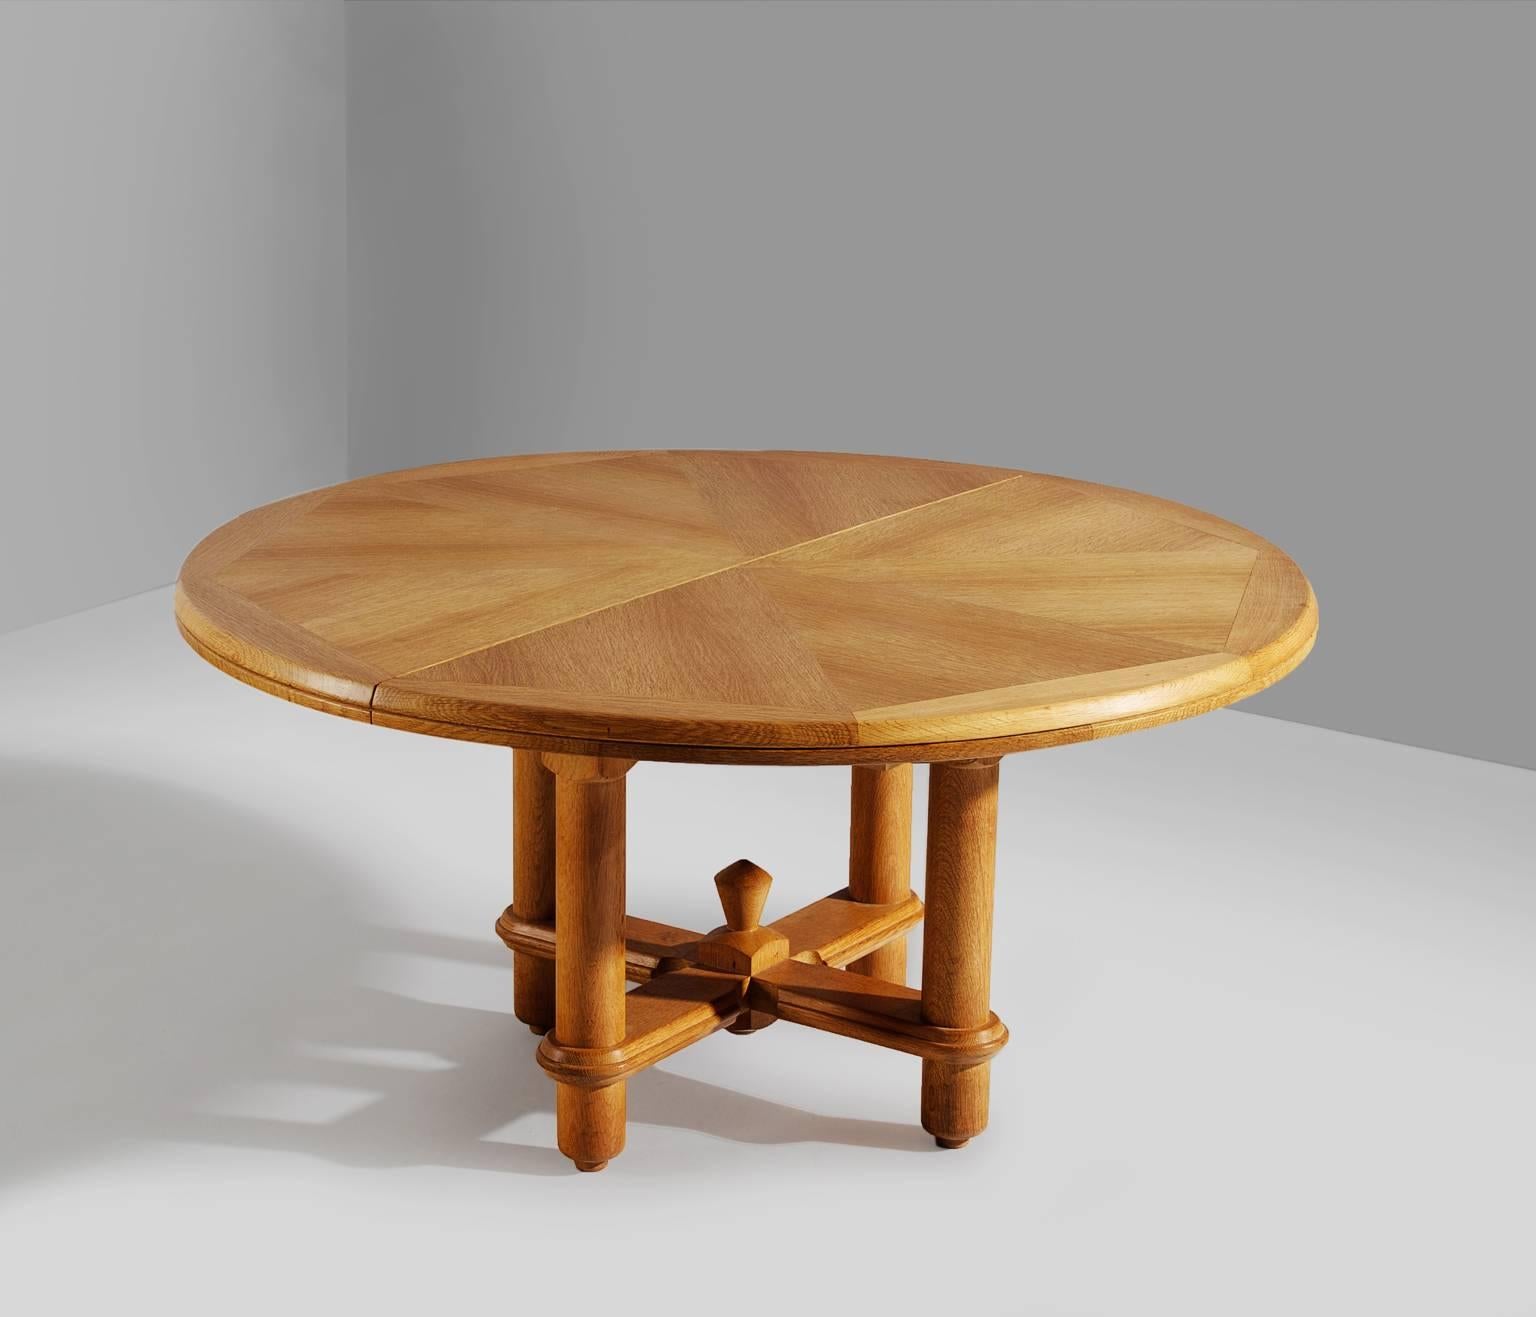 French 'Victorine' dining table in solid oak, by Guillerme et Chambron, 1970s. 

This wonderful table shows great craftsmanship and a strong appearance, that clearly characterizes the work of Guillerme & Chambron. It is in extremely good